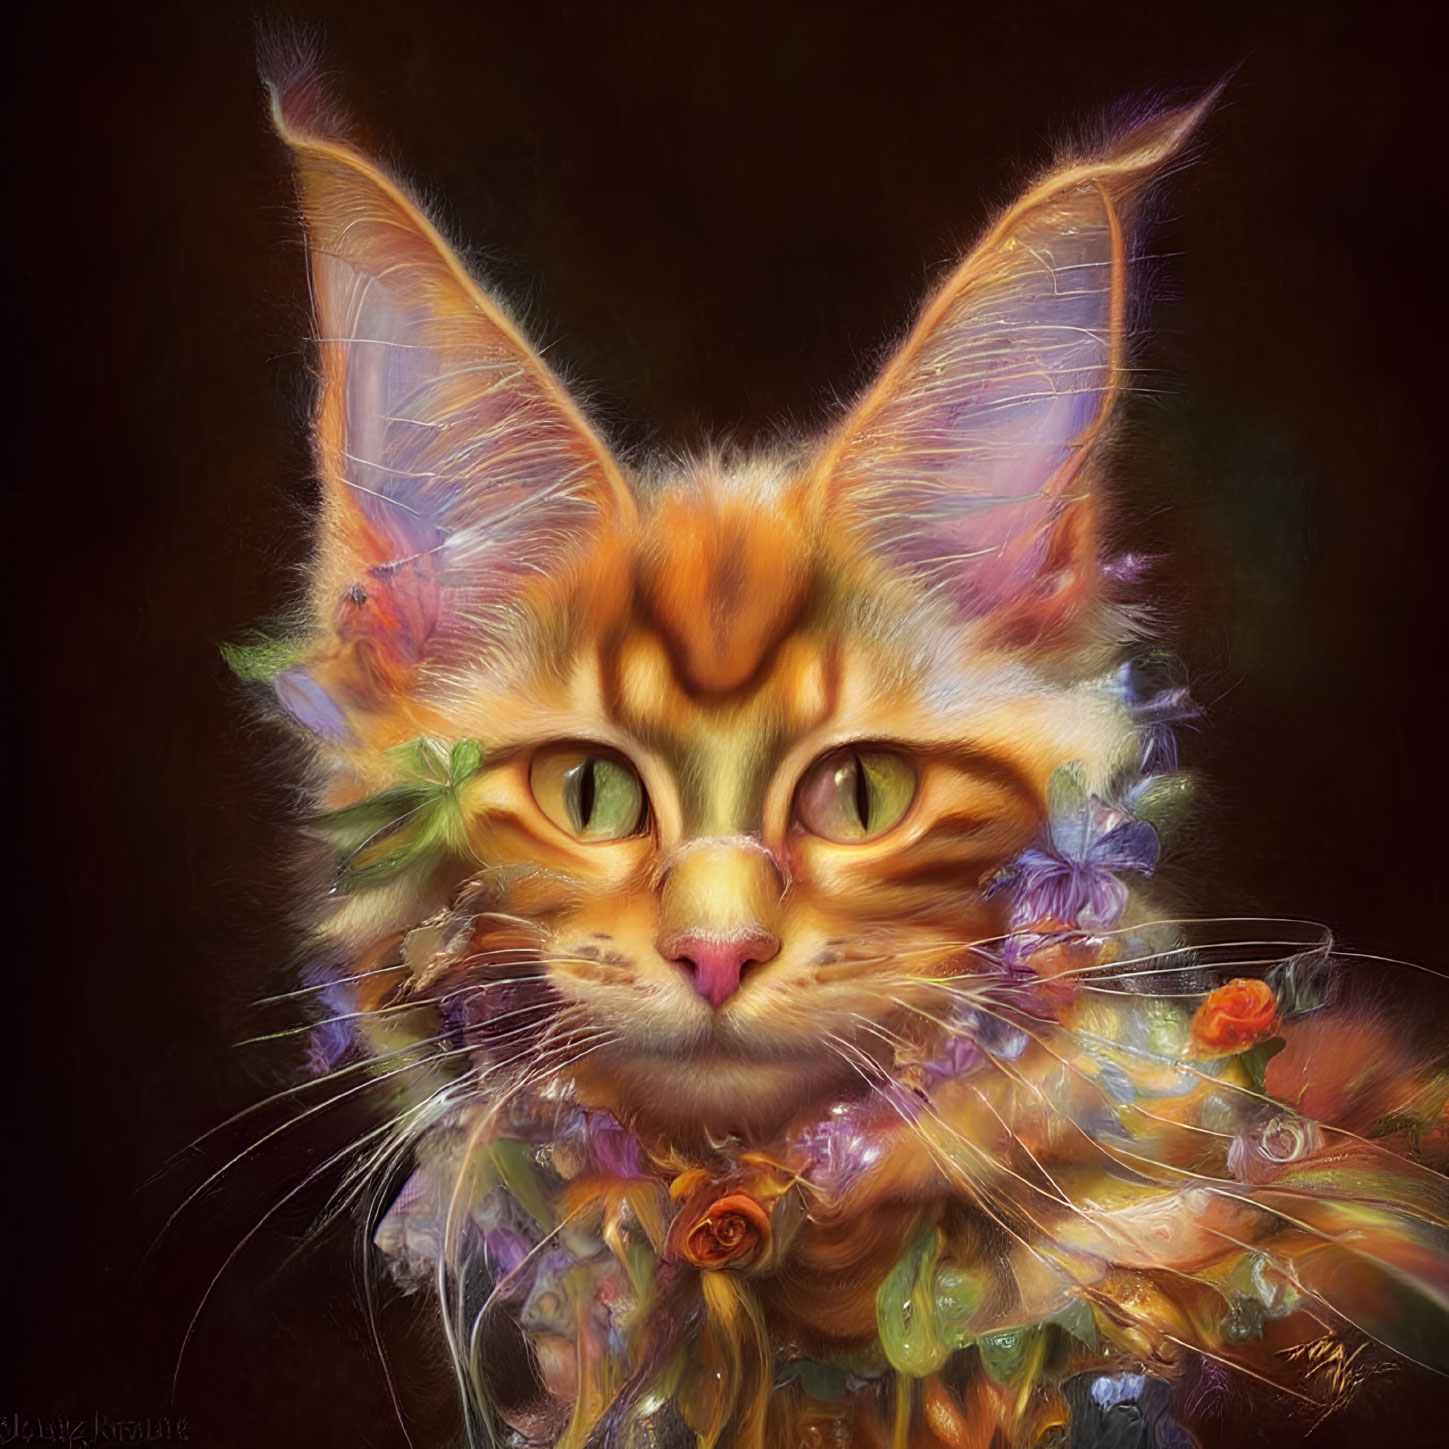 Whimsical large-eyed cat with colorful floral fur portrait